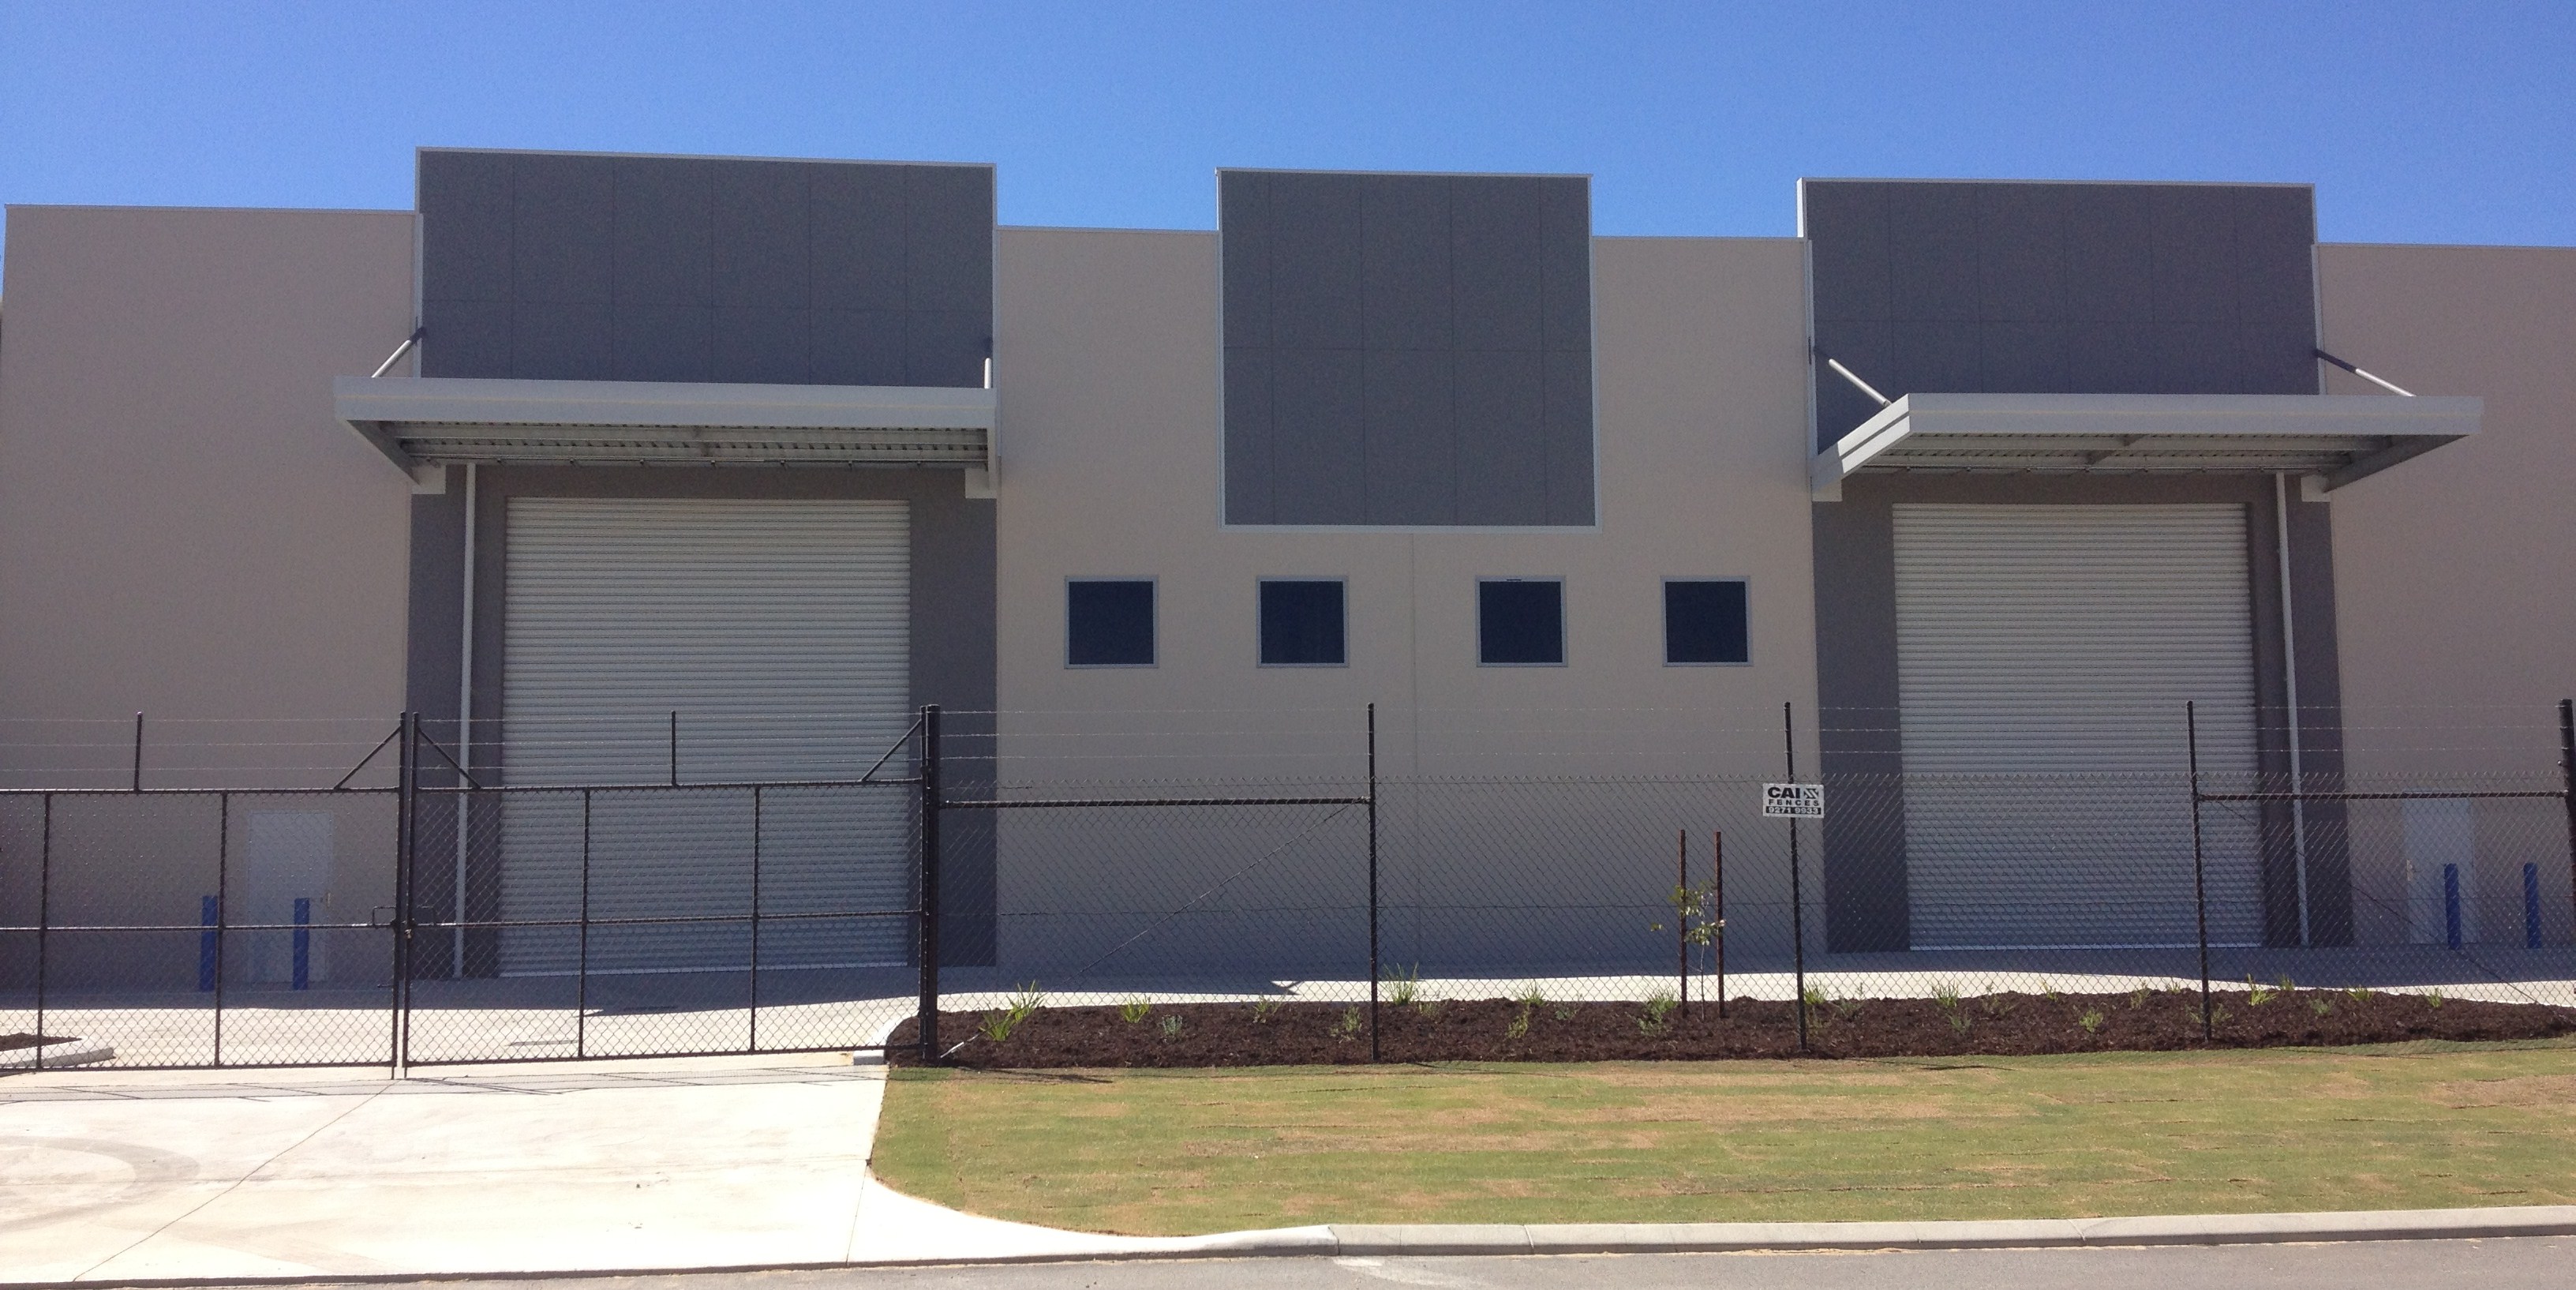 Exterior of large fenced commercial warehouse, painted in light grey with dark grey accents